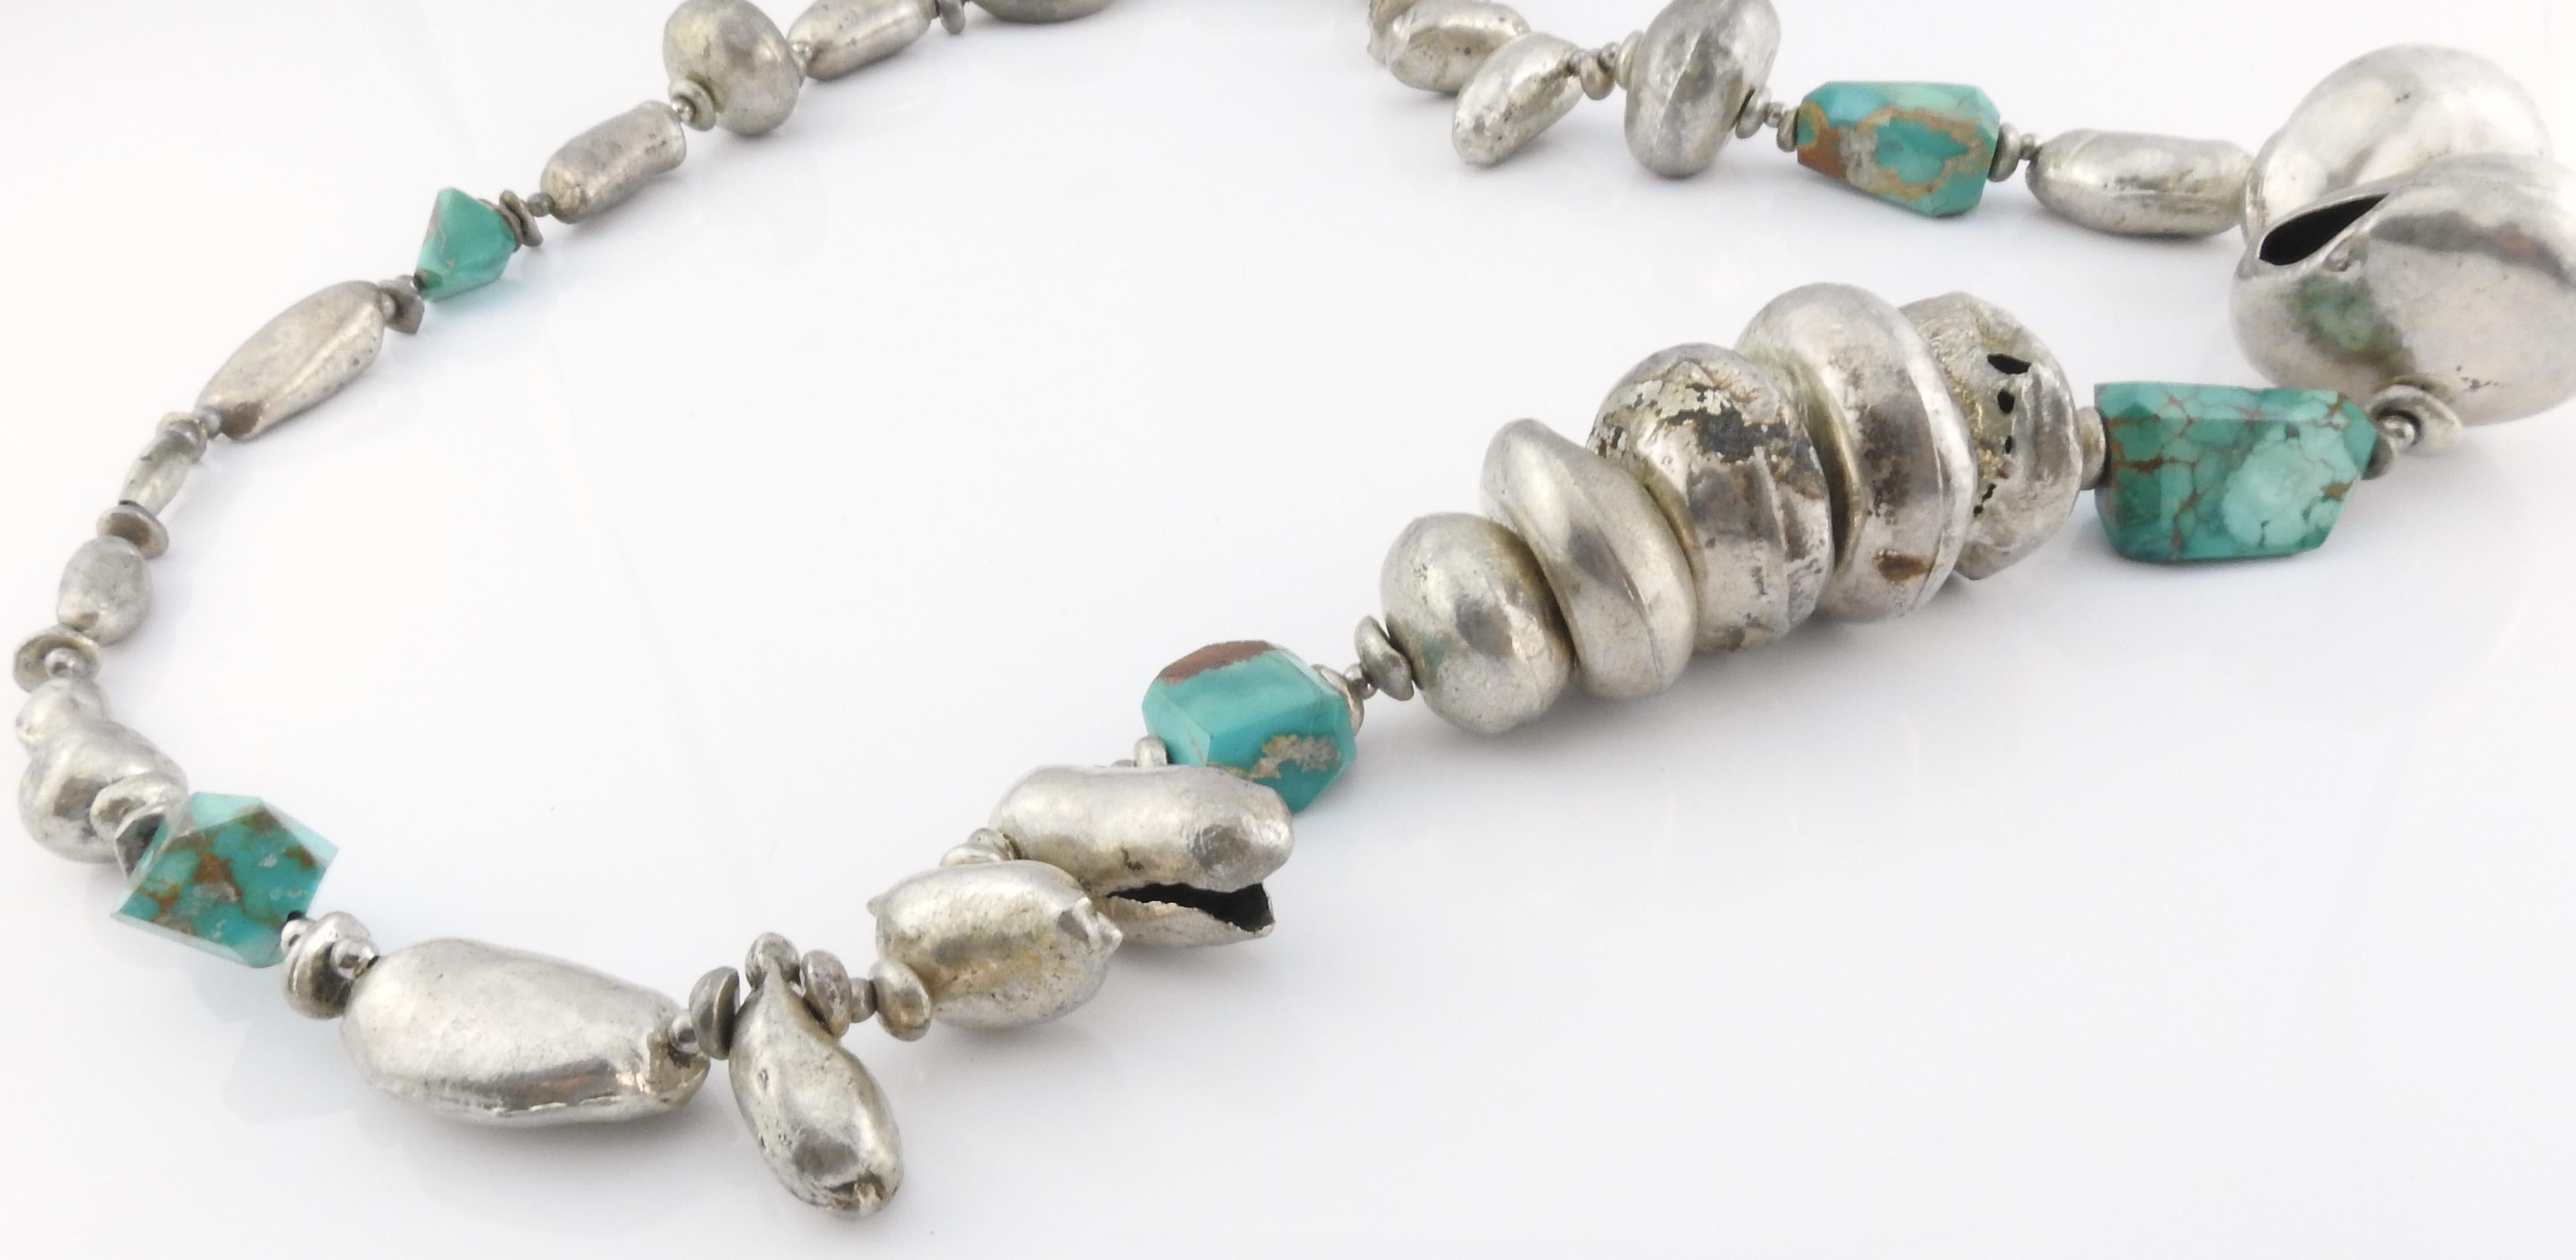 Vintage handmade puffy hollow silver bead and turquoise chunk necklace.

Weighs 260.7g, 167.6dwt.

Necklace has no markings.

Has not been polished.

Beads range in size from 5mm x 12mm to 39mm x 25mm.

Turquoise chunks range from 12mm x 14mm to